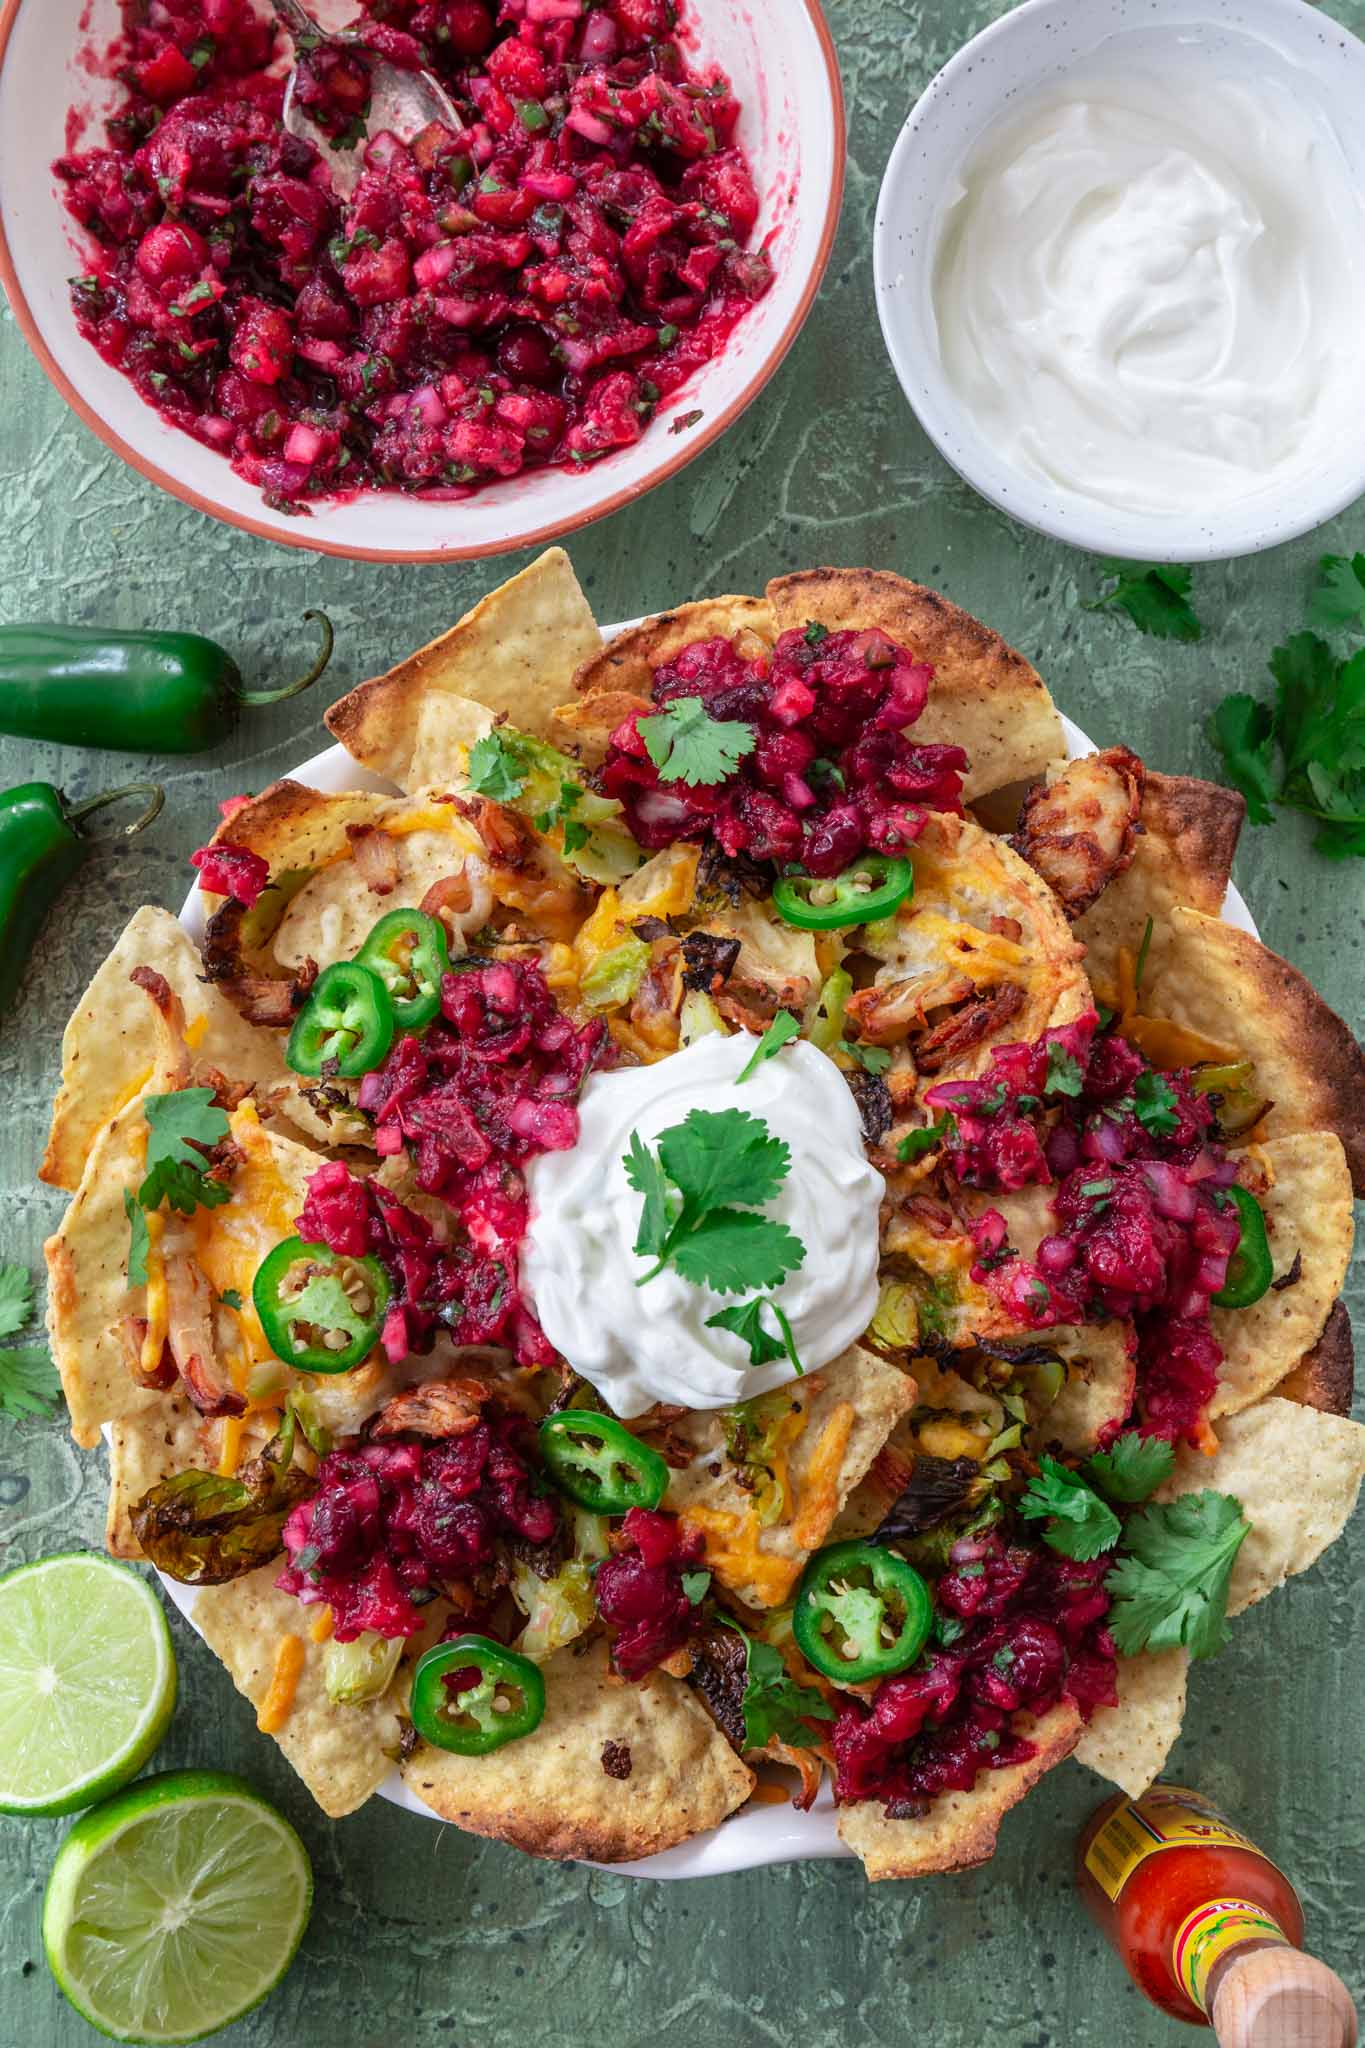 Thanksgiving Leftover Turkey Nachos | www.oliviascuisine.com | If you're looking for a way to use all that leftover turkey from Thanksgiving, these Leftover Turkey Nachos might be just what you need! Crispy Mission® Triangles Tortilla Chips topped with turkey carnitas, cranberry sauce salsa, Brussels sprouts and lots of cheese. Oh, it doesn't get better than that!